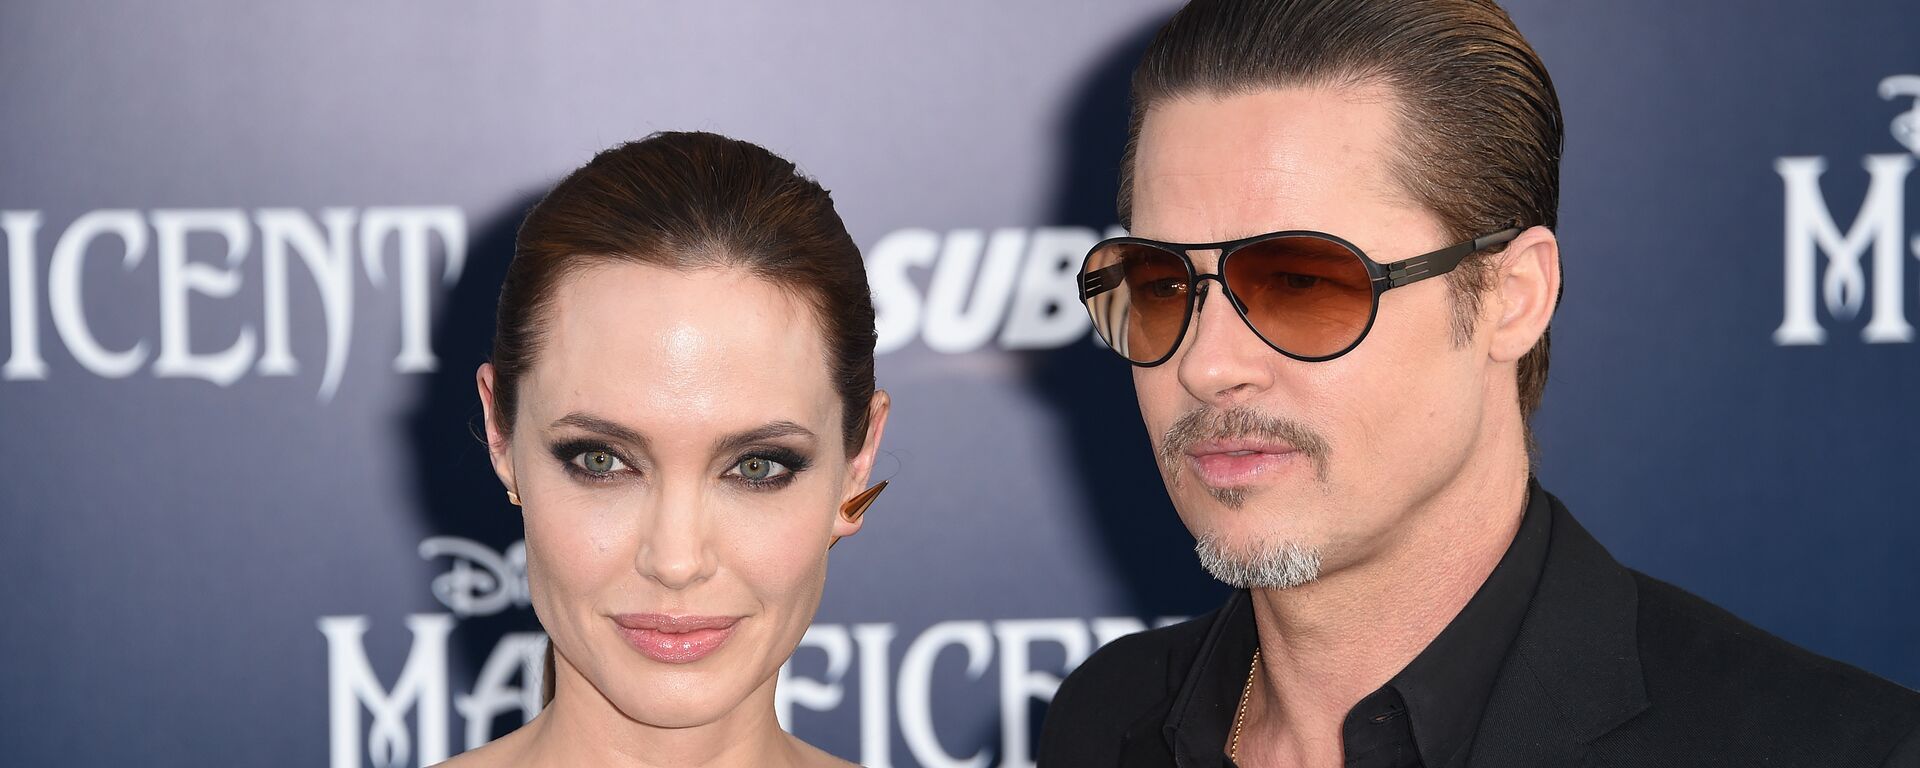 Angelina Jolie and Brad Pitt arrive for the world premiere of Disney's Maleficent, May 28, 2014, at El Capitan Theatre in Hollywood, California. - Sputnik International, 1920, 05.10.2022